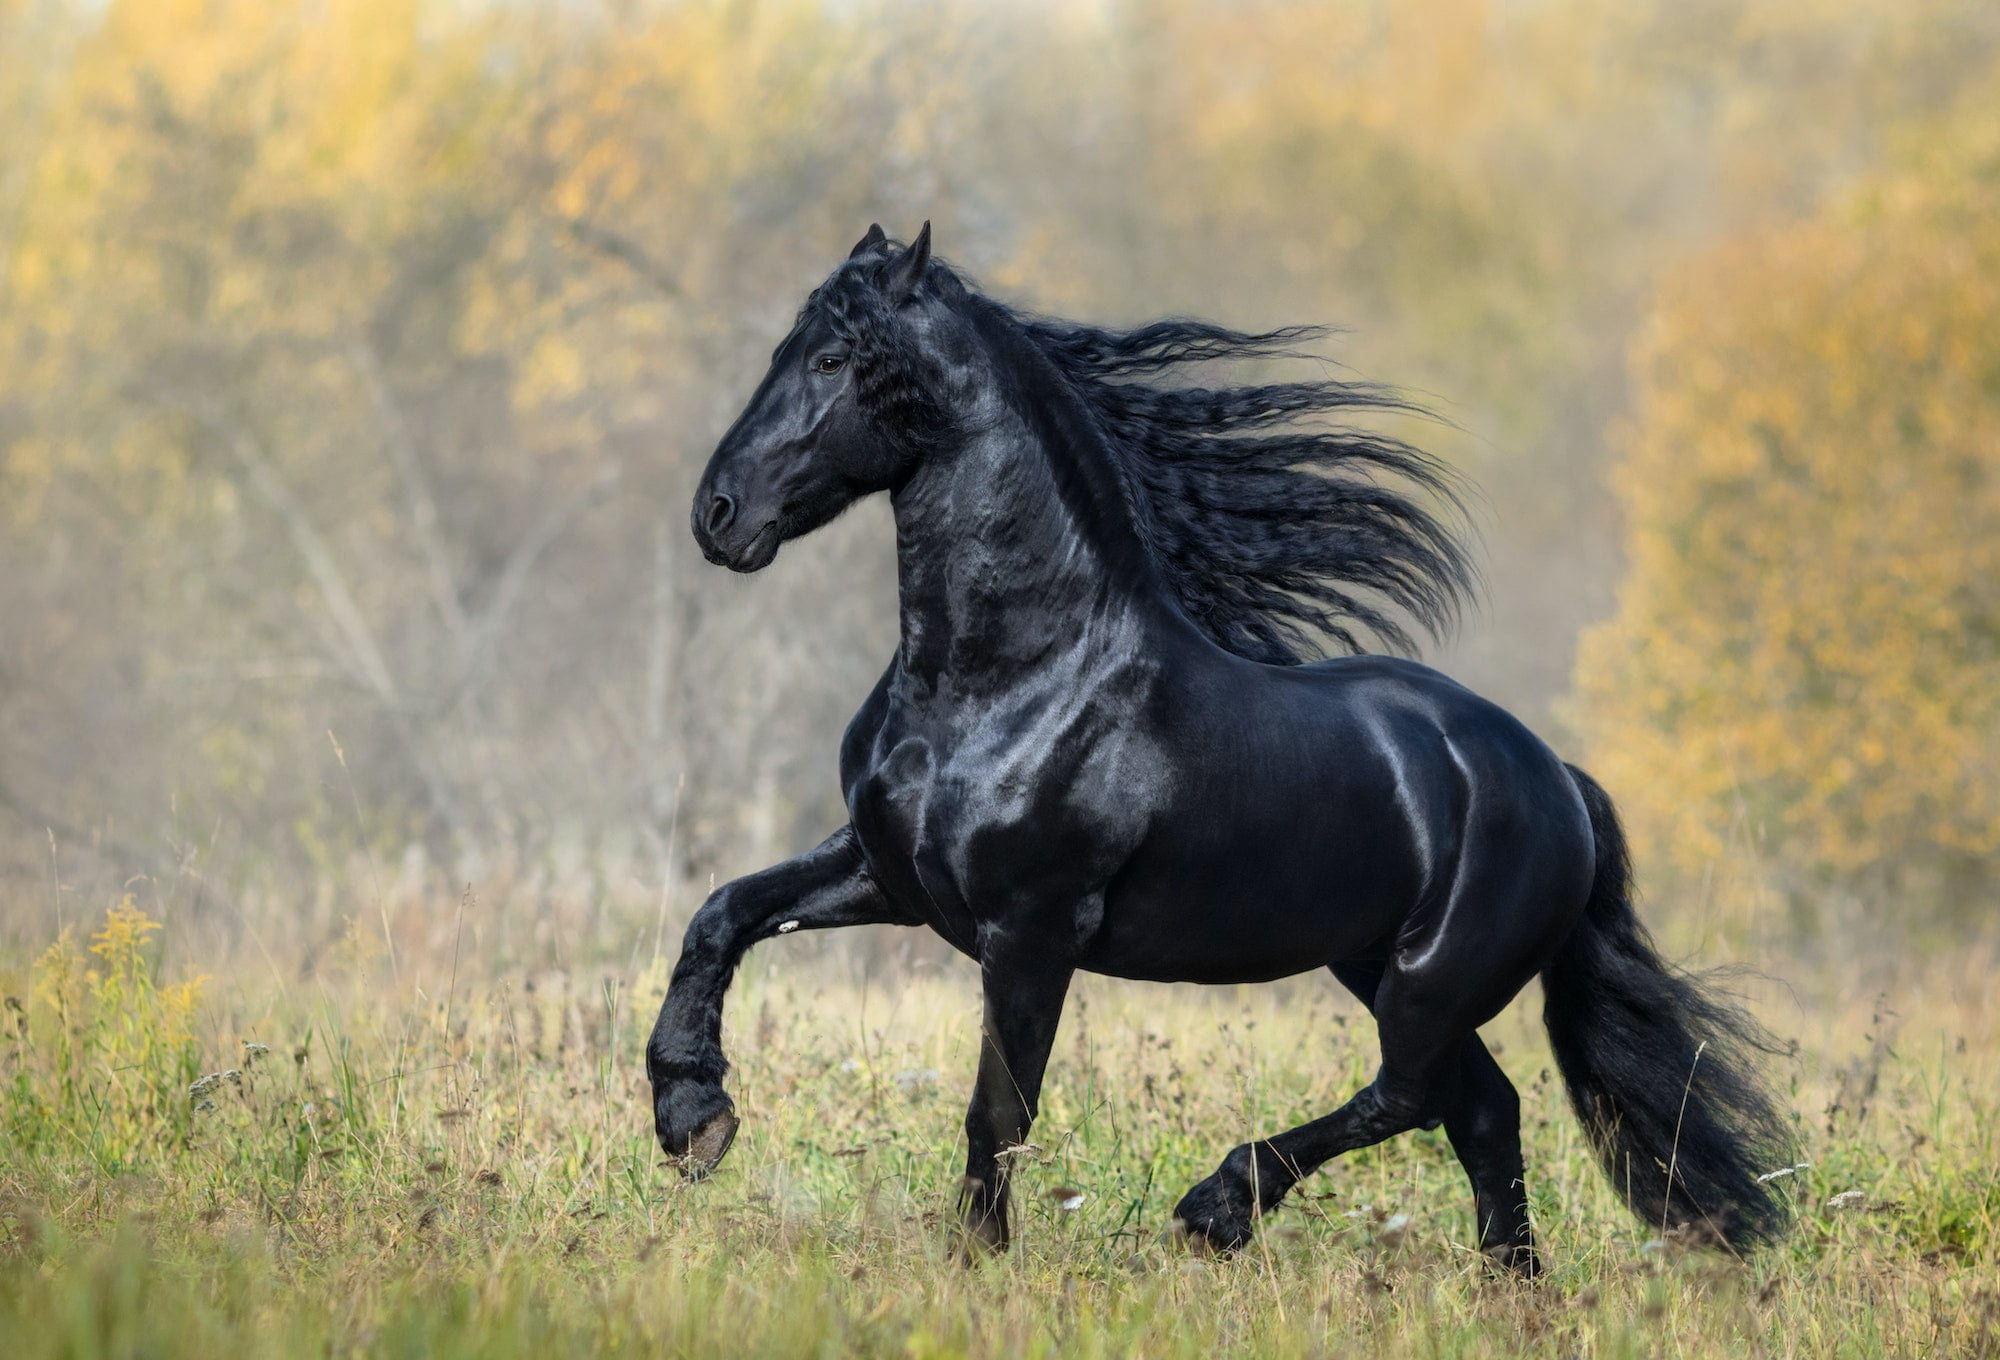 The Black Horse of the Frisian breed walks in the Autumn foggy wood